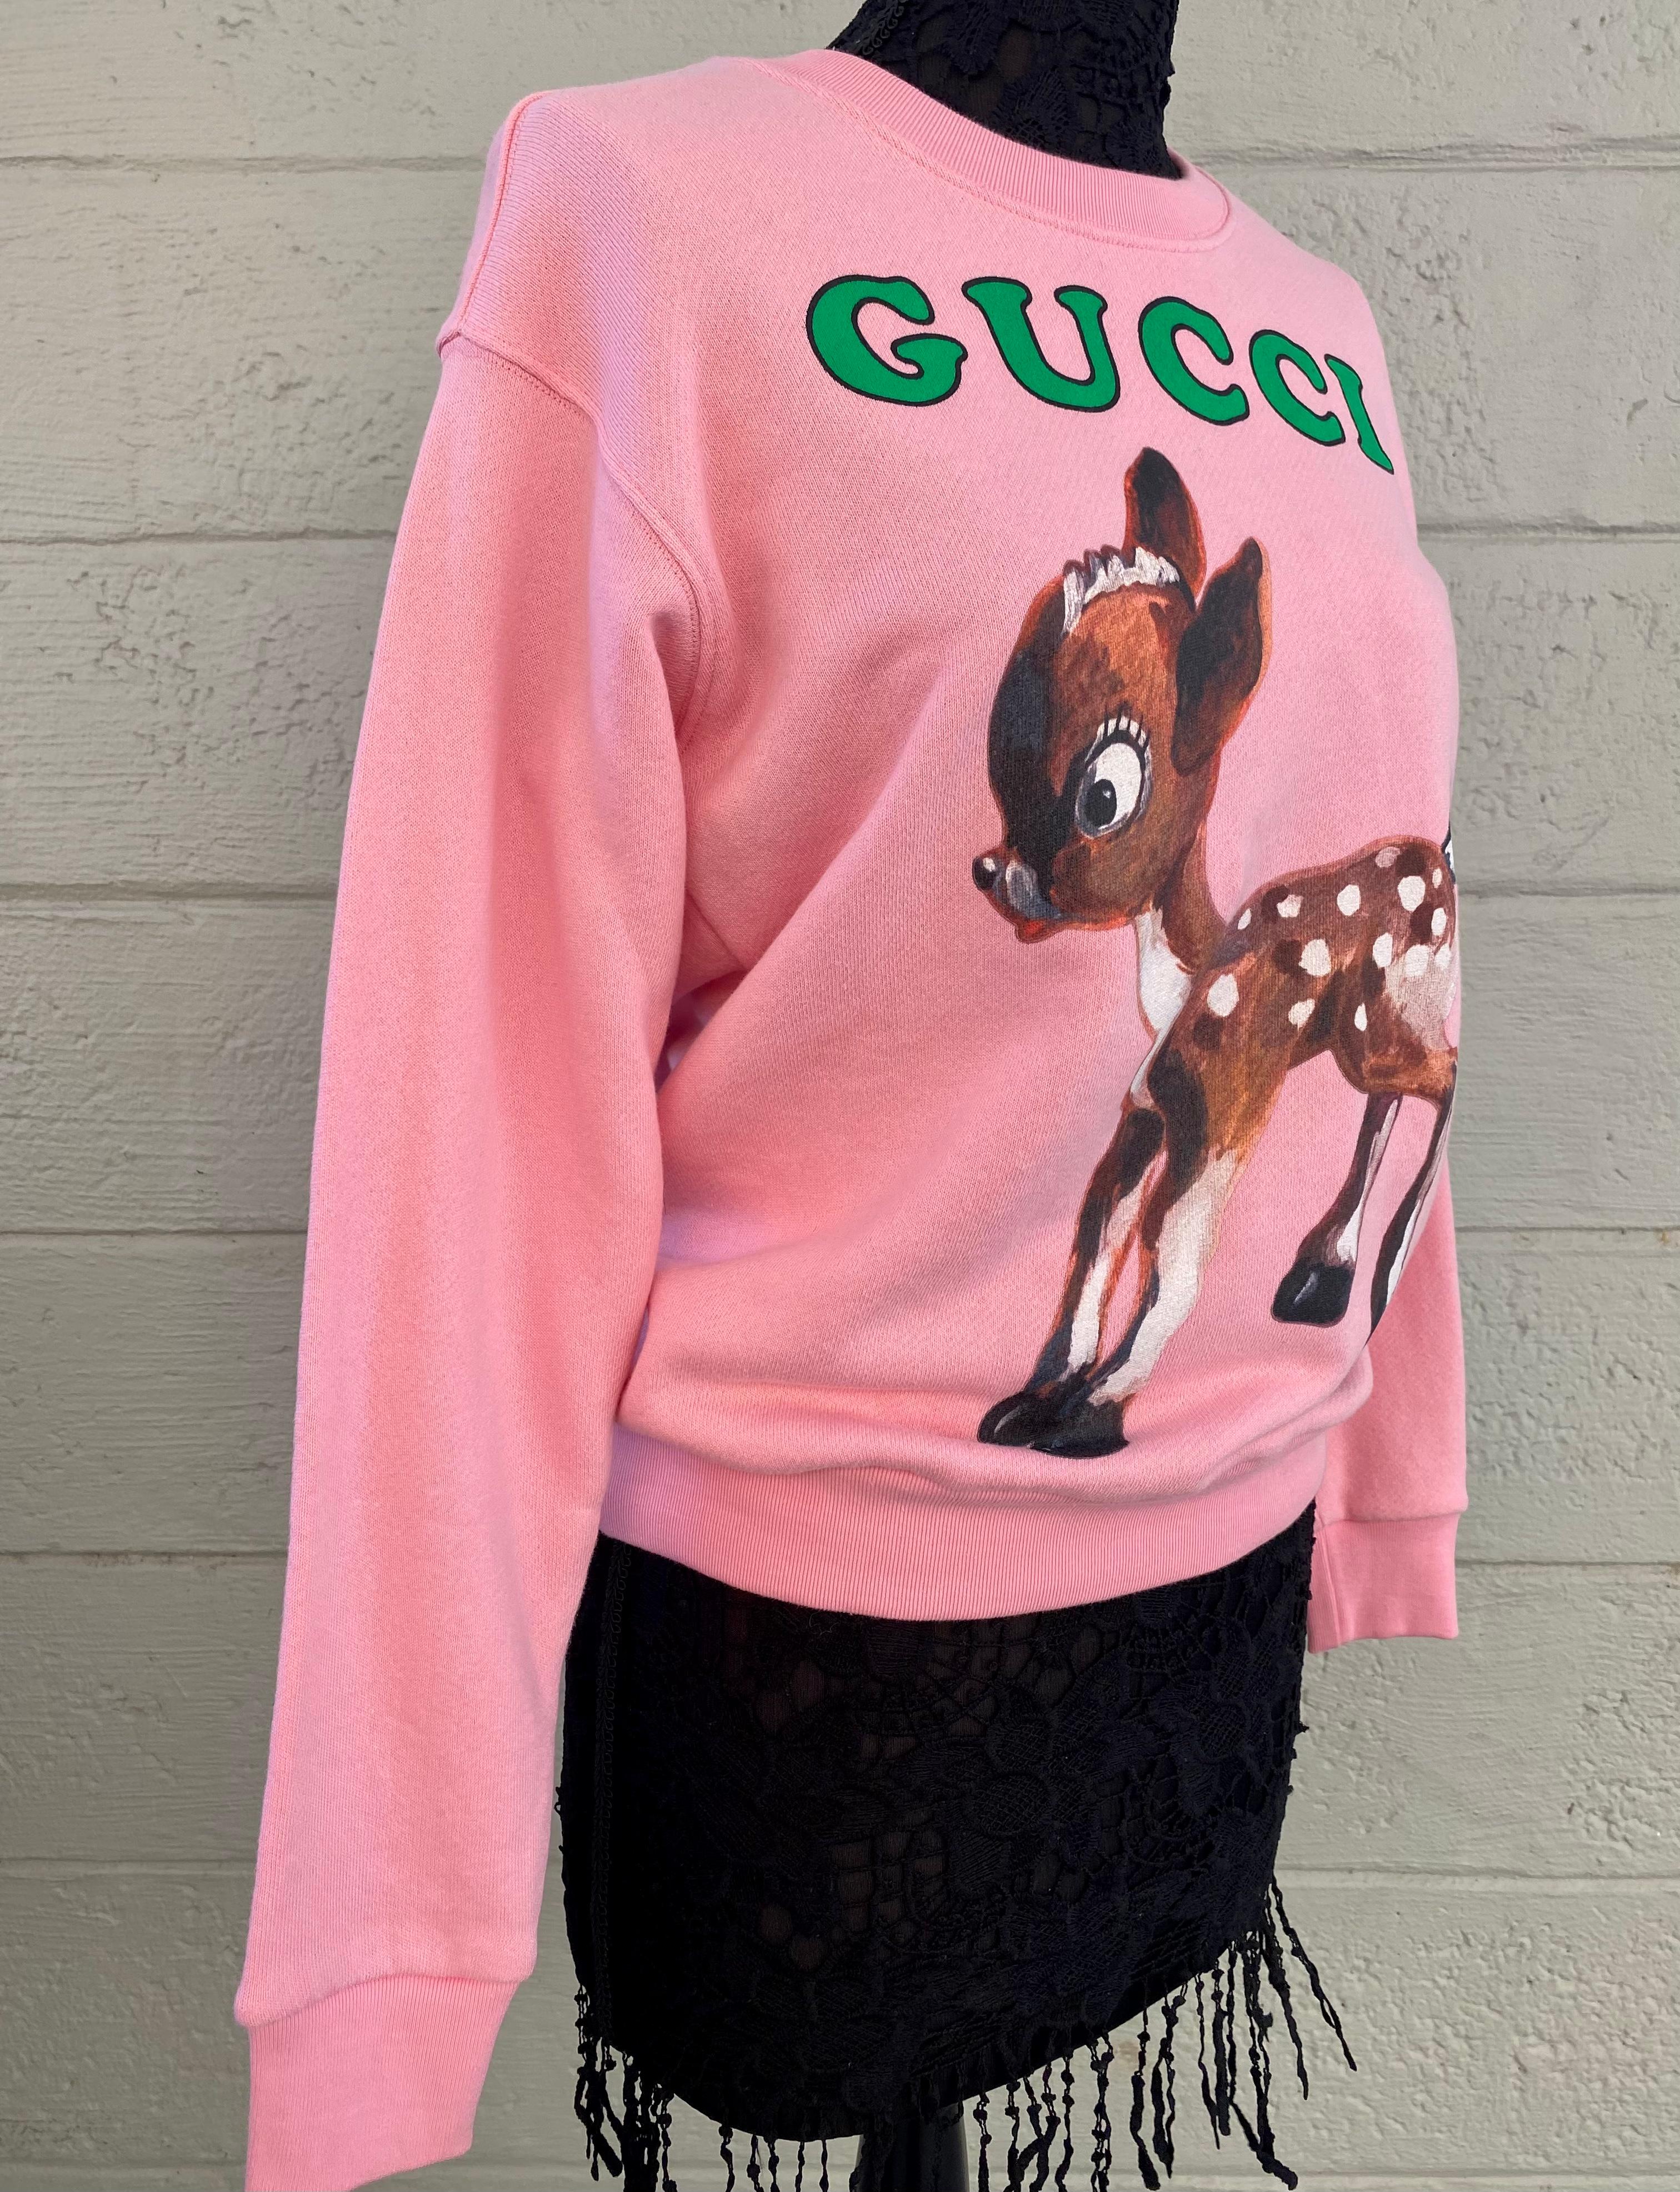 Fabulous designs evoking childhood memories are often incorporated into the Gucci collection. Limited edition collector's piece! A fawn is shown on the front of this oversize sweatshirt paired with the Gucci logo. The ladybug and flowers print on